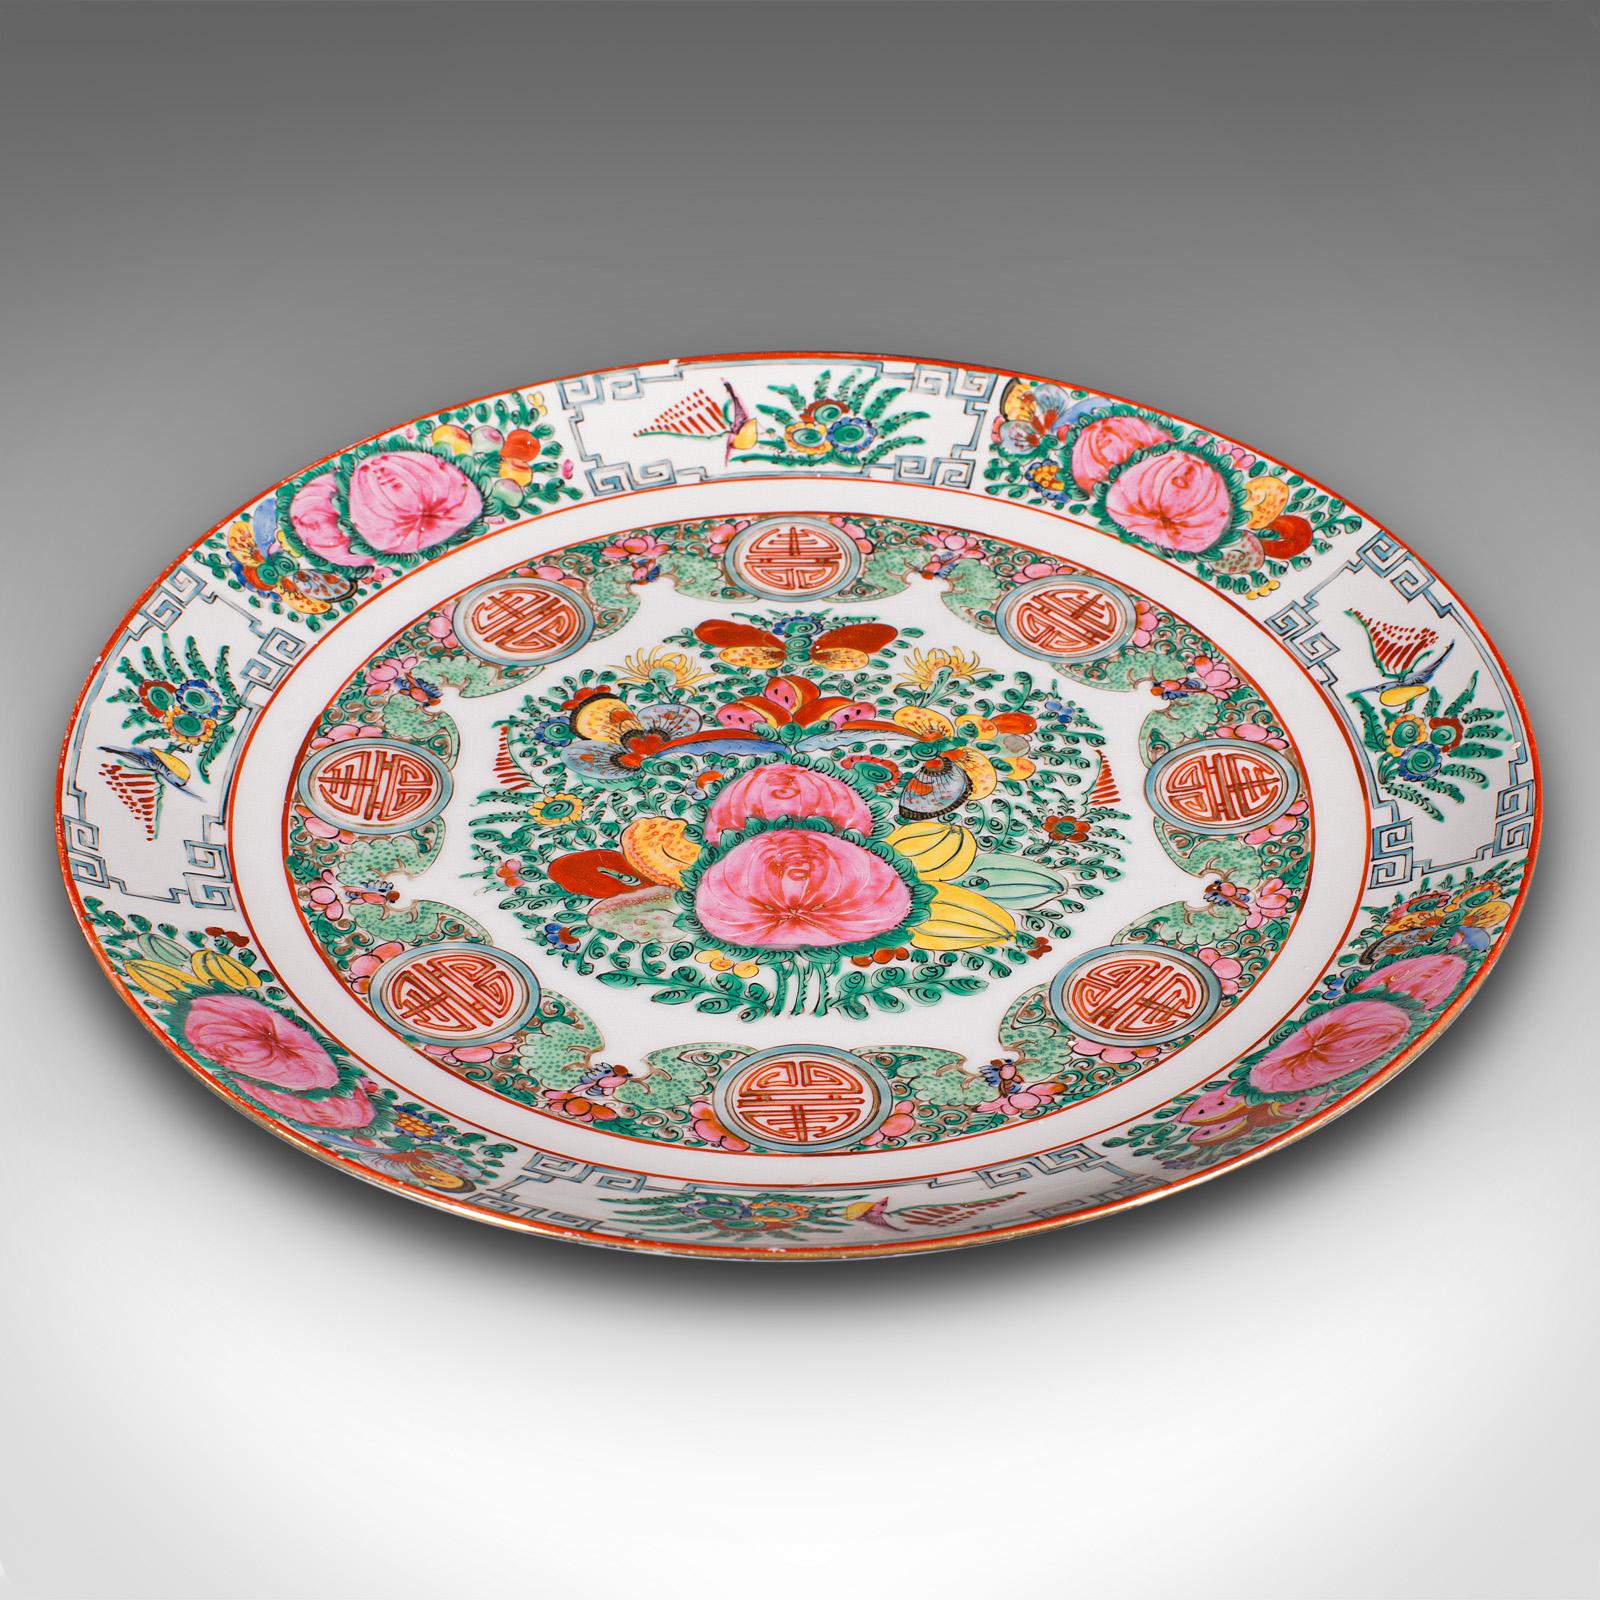 This is an antique celebration plate. A Chinese, ceramic decorative charger, dating to the late Victorian period, circa 1900.

Exceptional colour adorns this charming decorative plate
Displays a desirable aged patina and in good order
Quality white